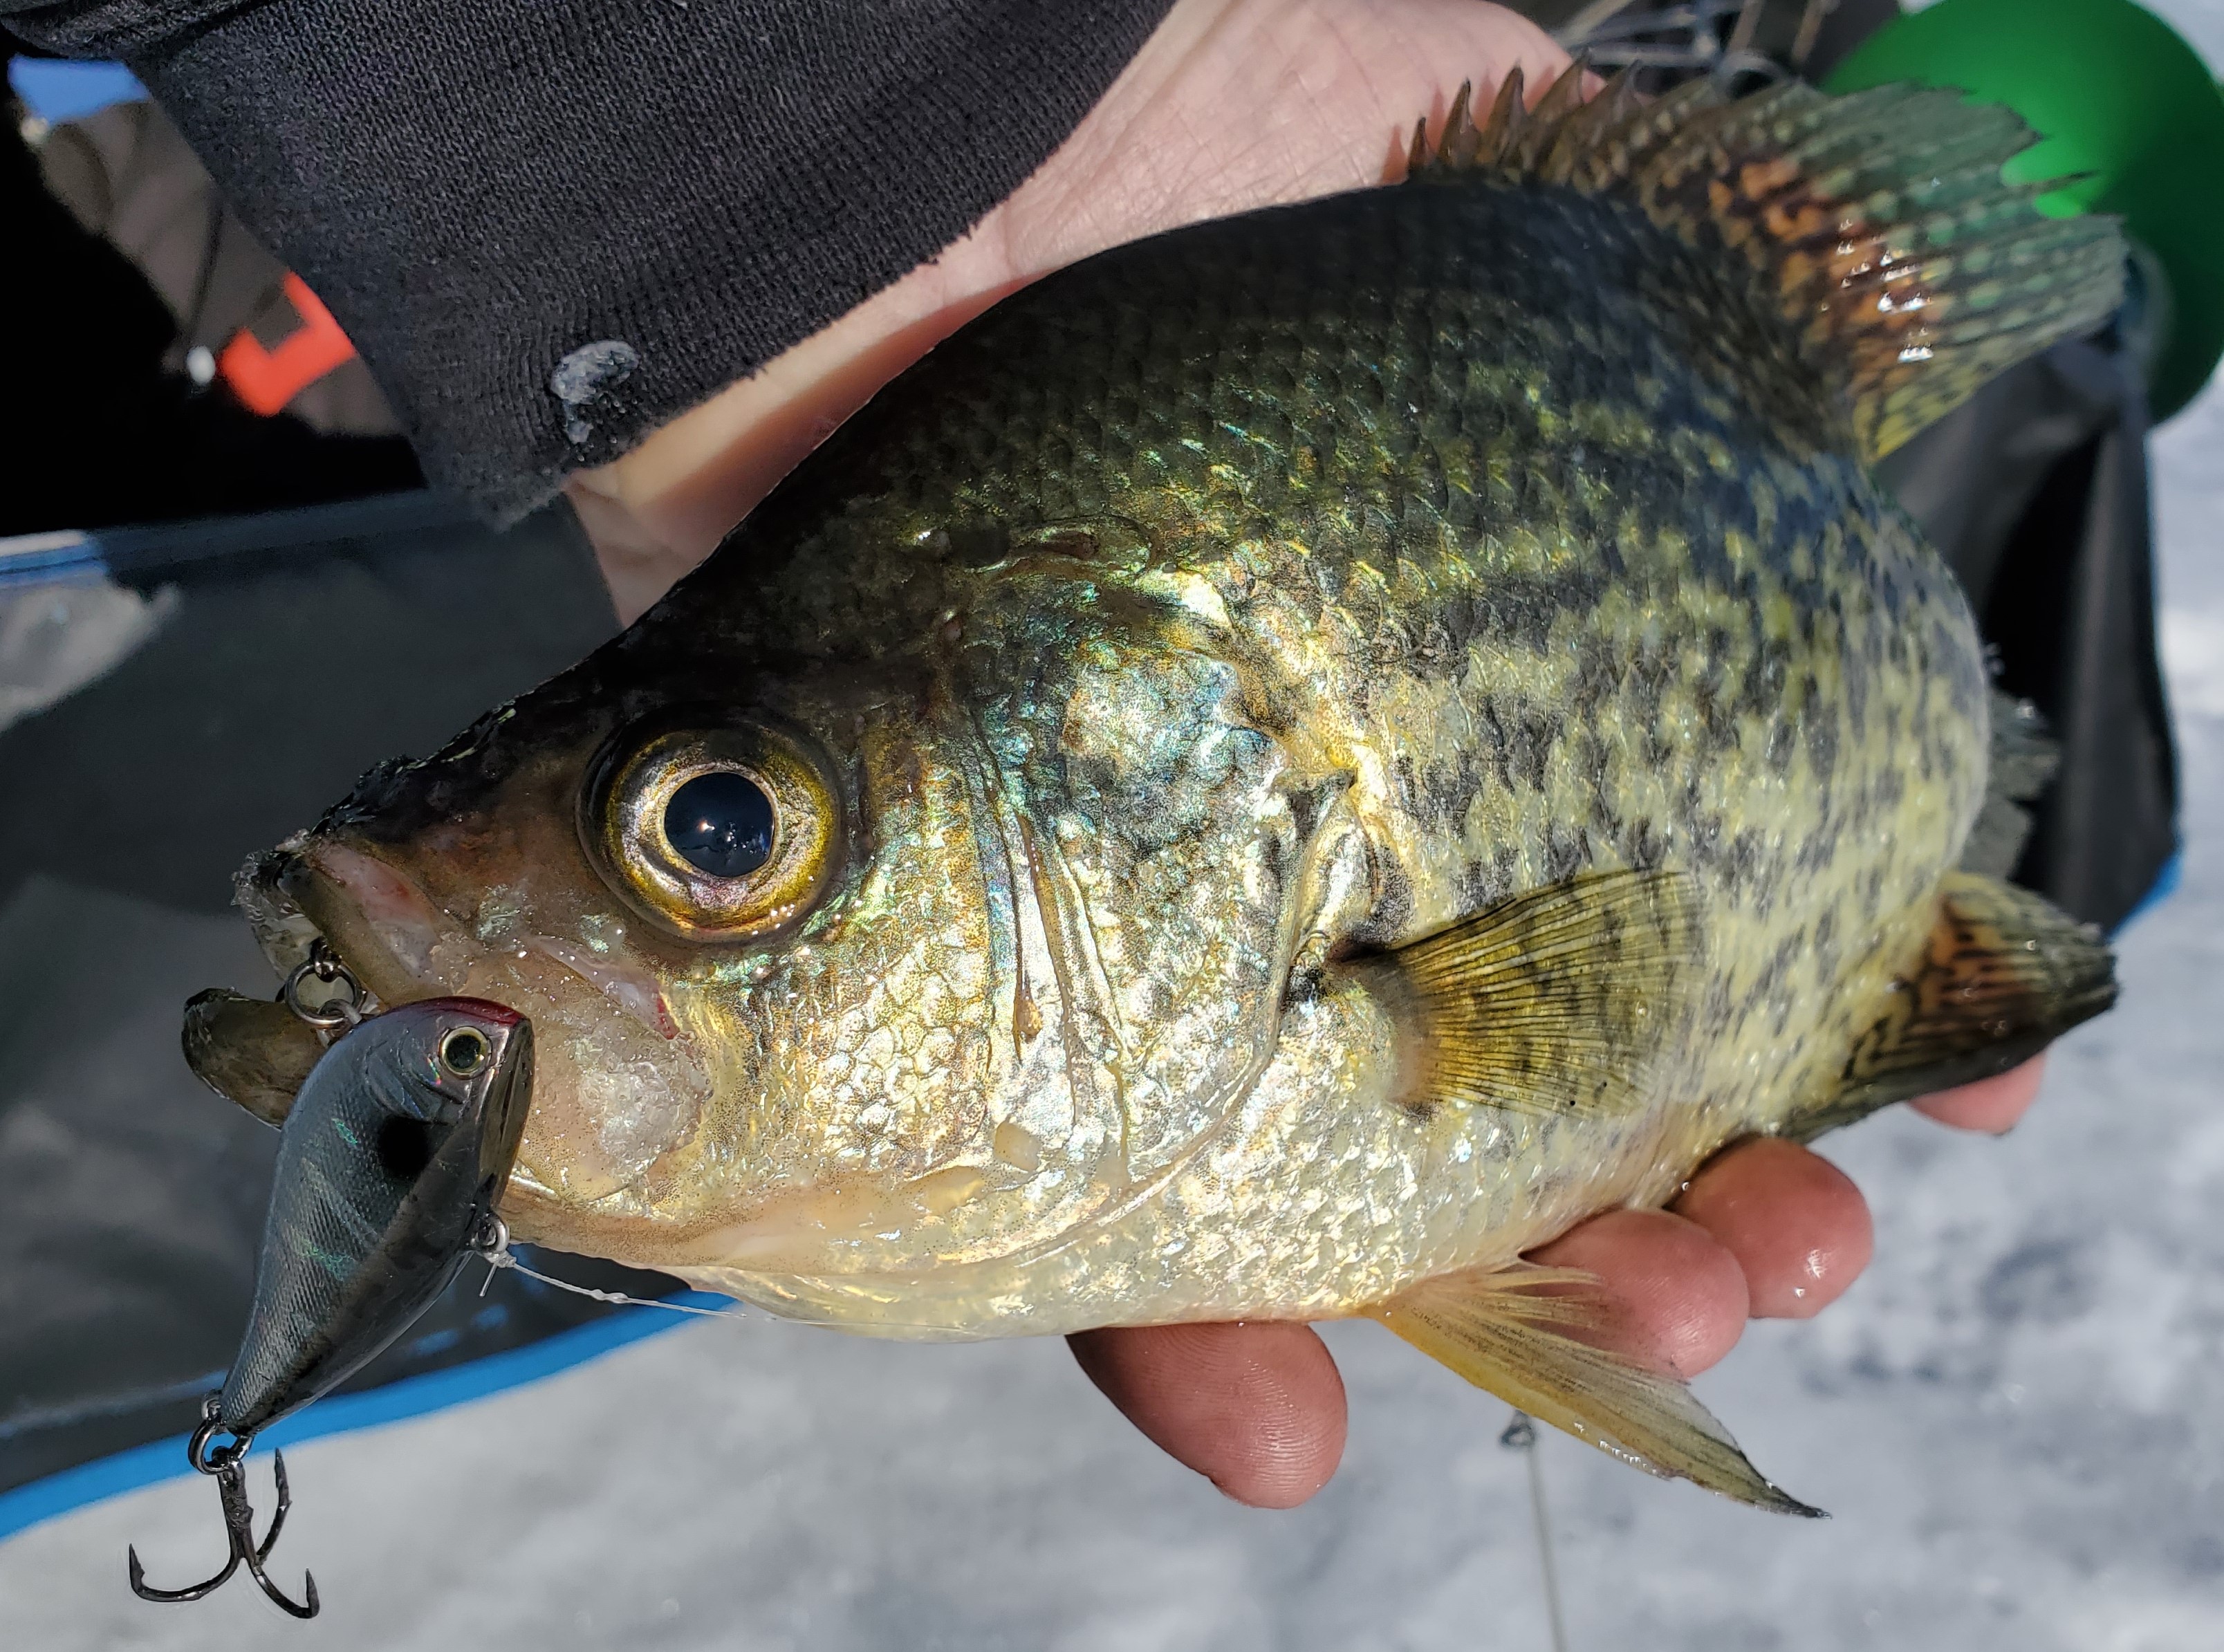 Top 10 Panfish Ice Lures of All Time - In-Fisherman